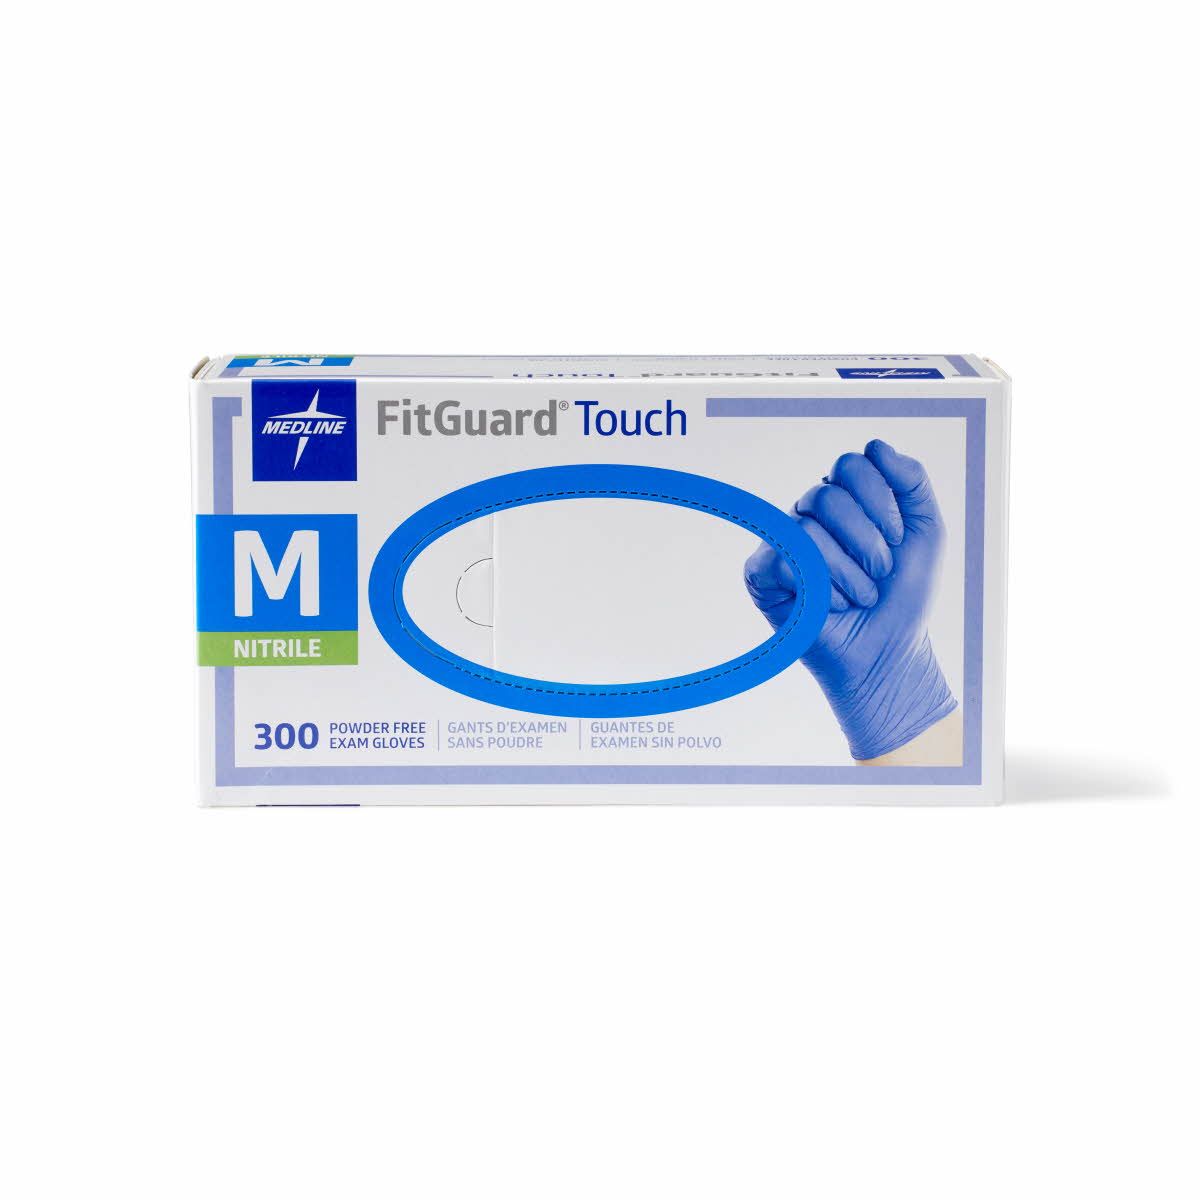 Medline® FitGuard Touch Powder-Free Nitrile Exam Gloves (300 Count)